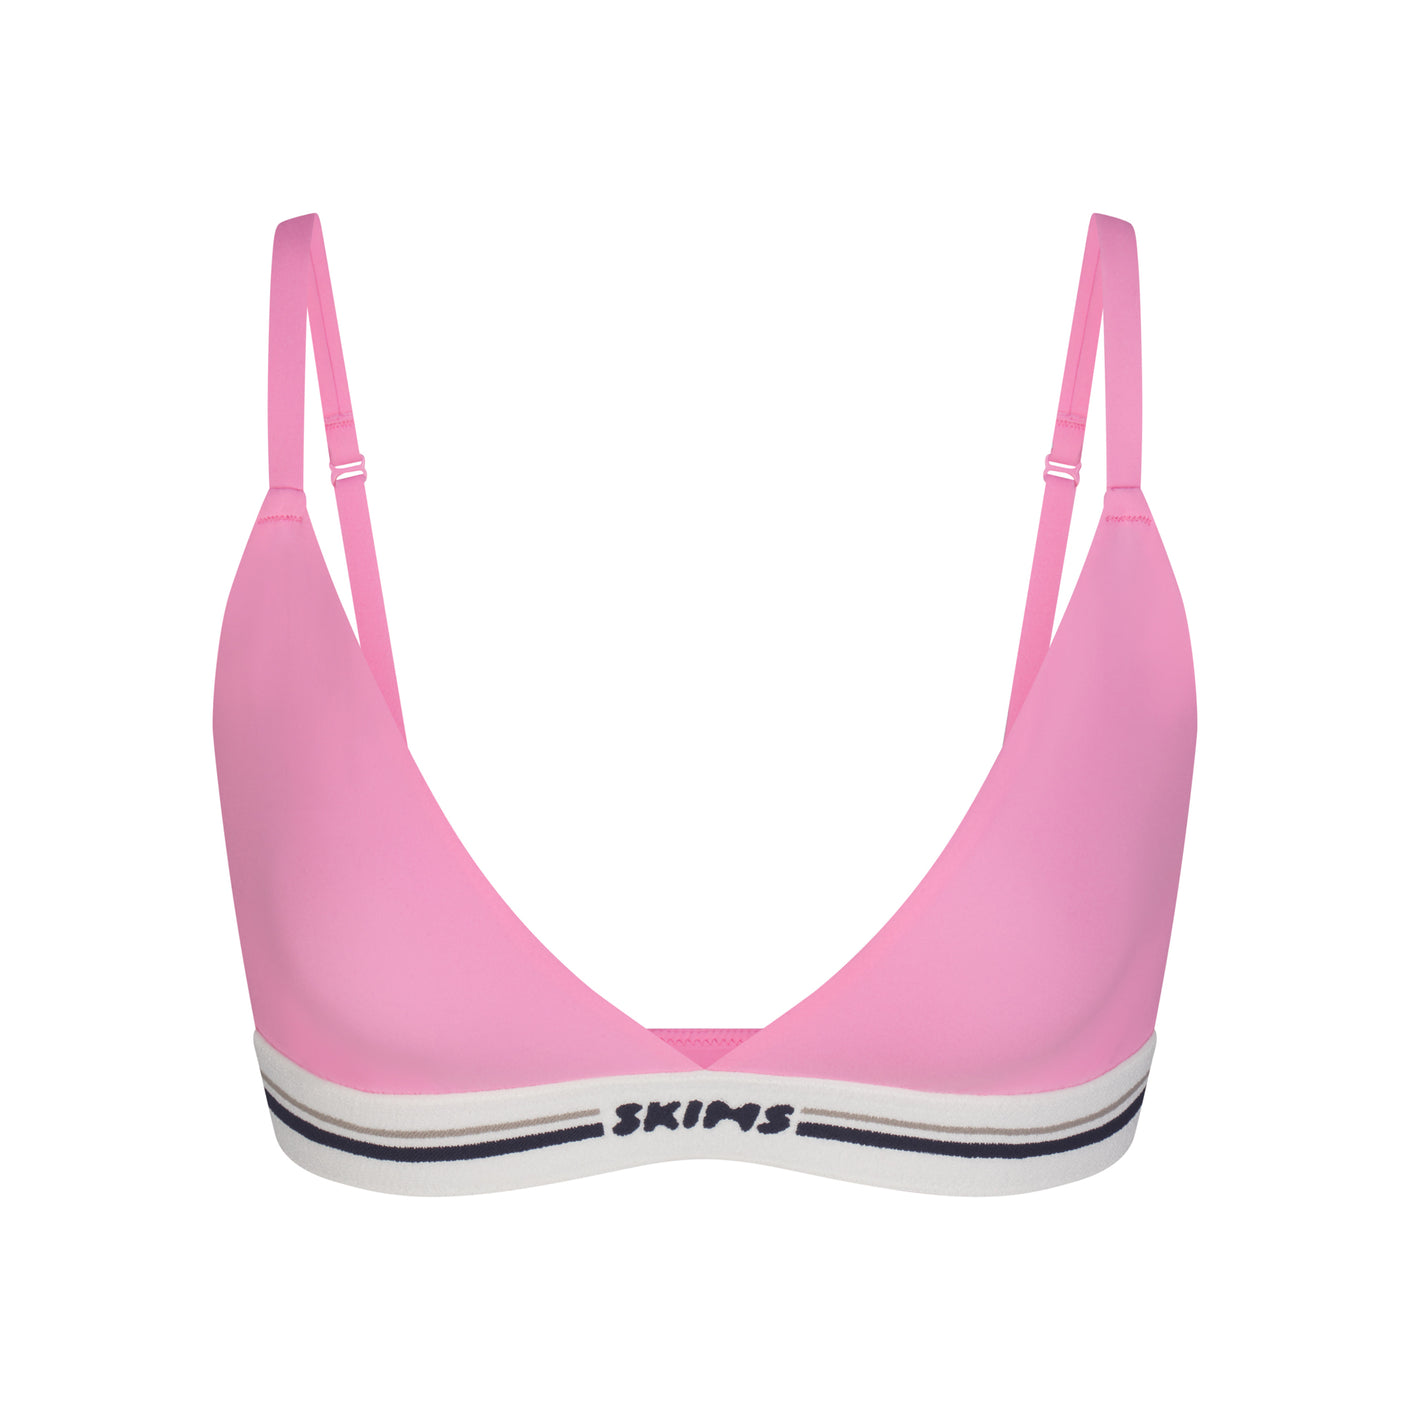 SKIMS FITS EVERYBODY TRIANGLE BRALETTE, ULTRA PINK on Marmalade